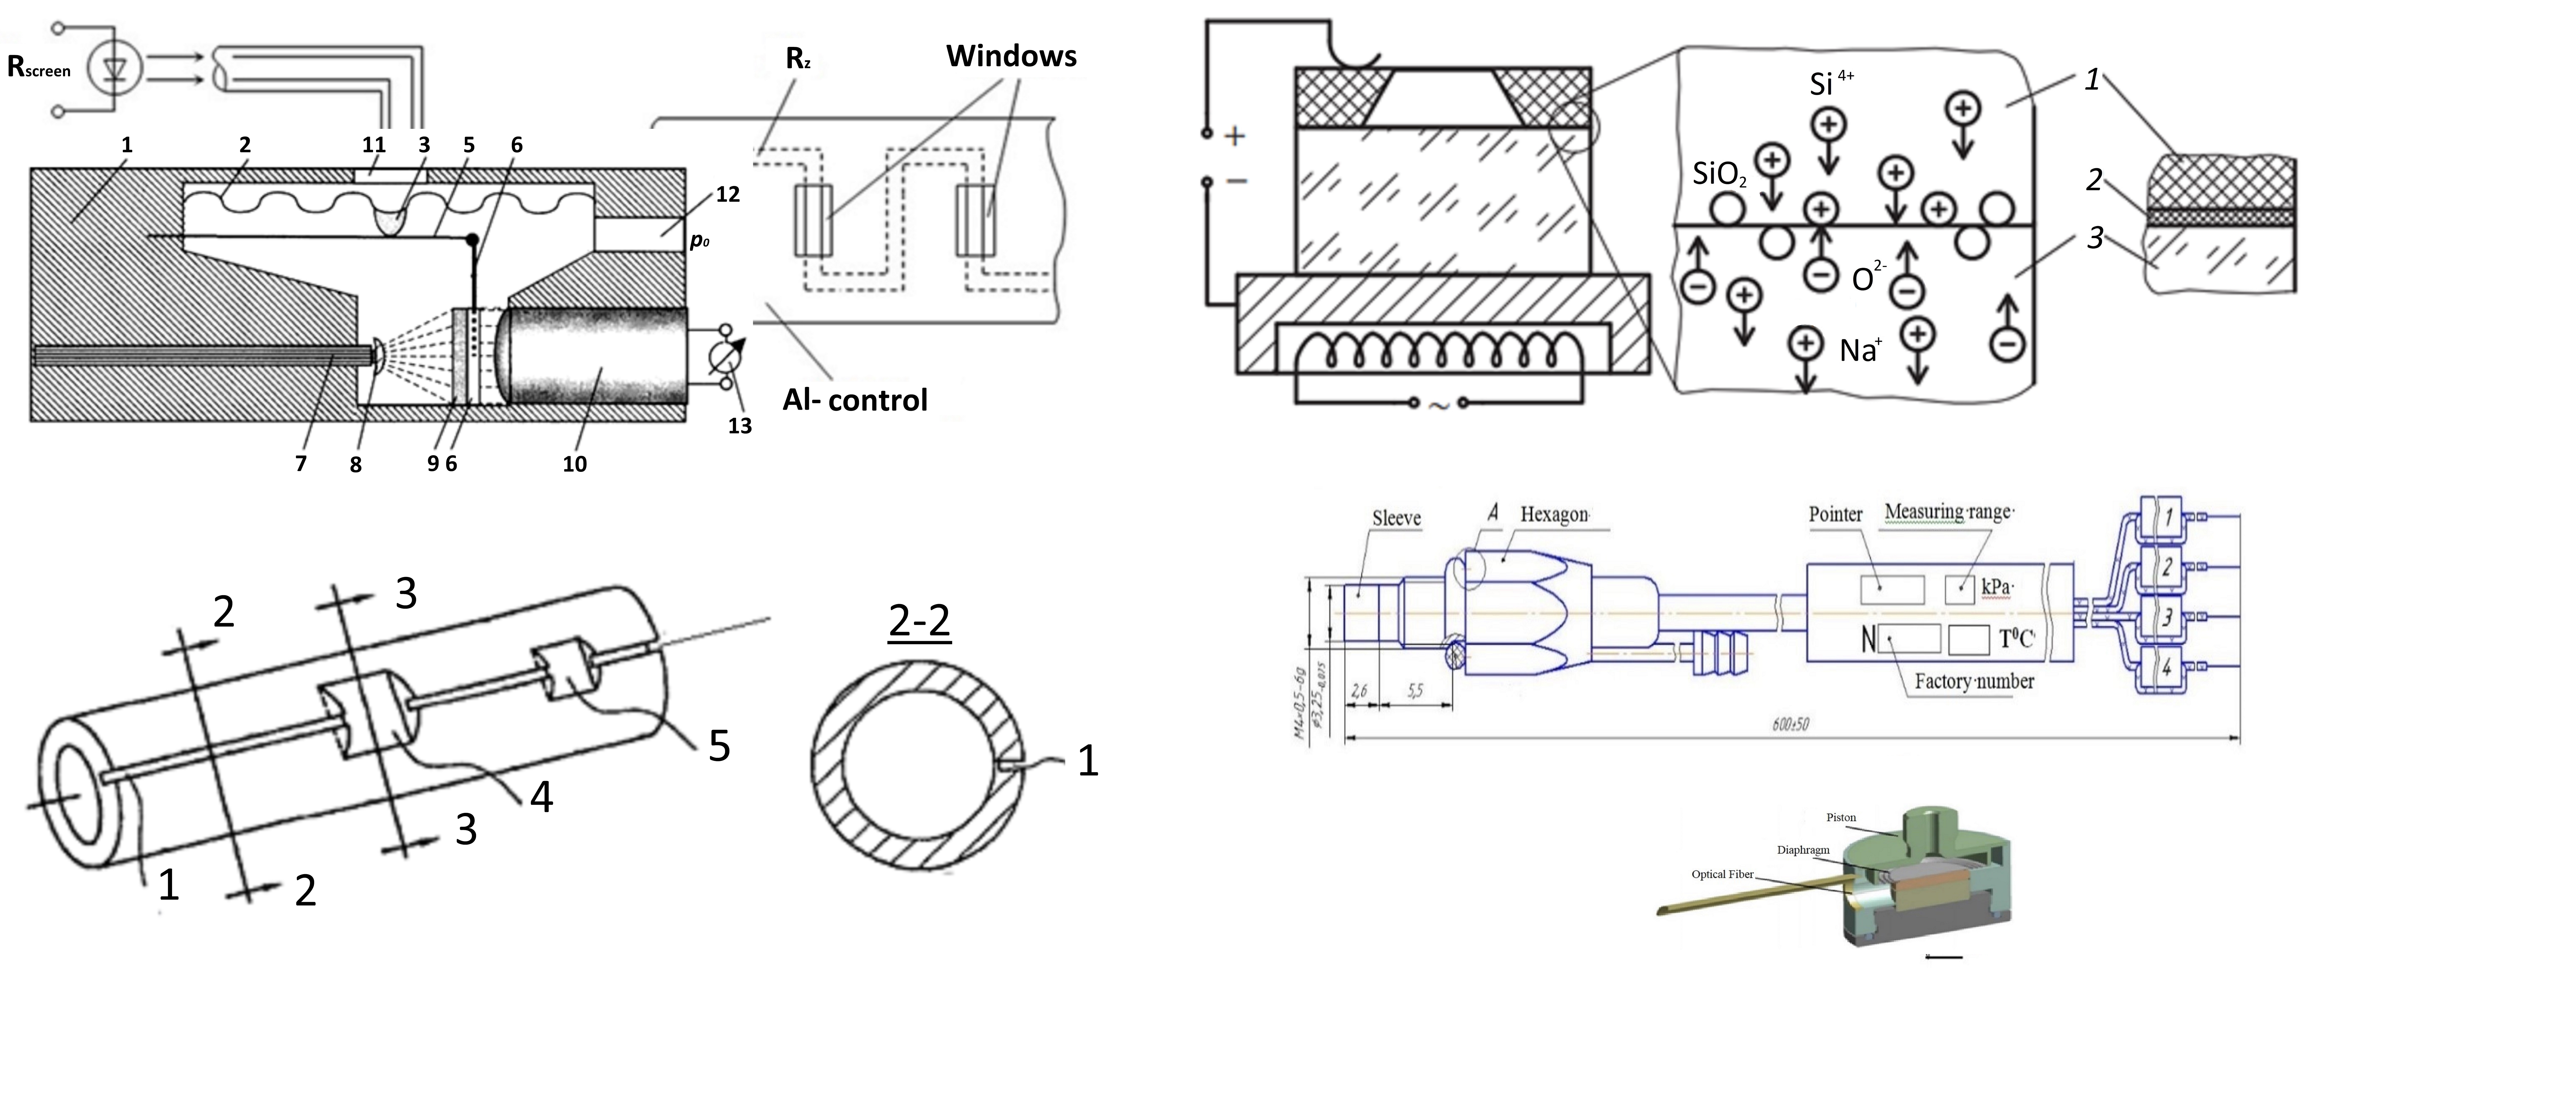 Development of the design and technology for manufacturing a combined fiber-optic sensor used for extreme operating conditions 